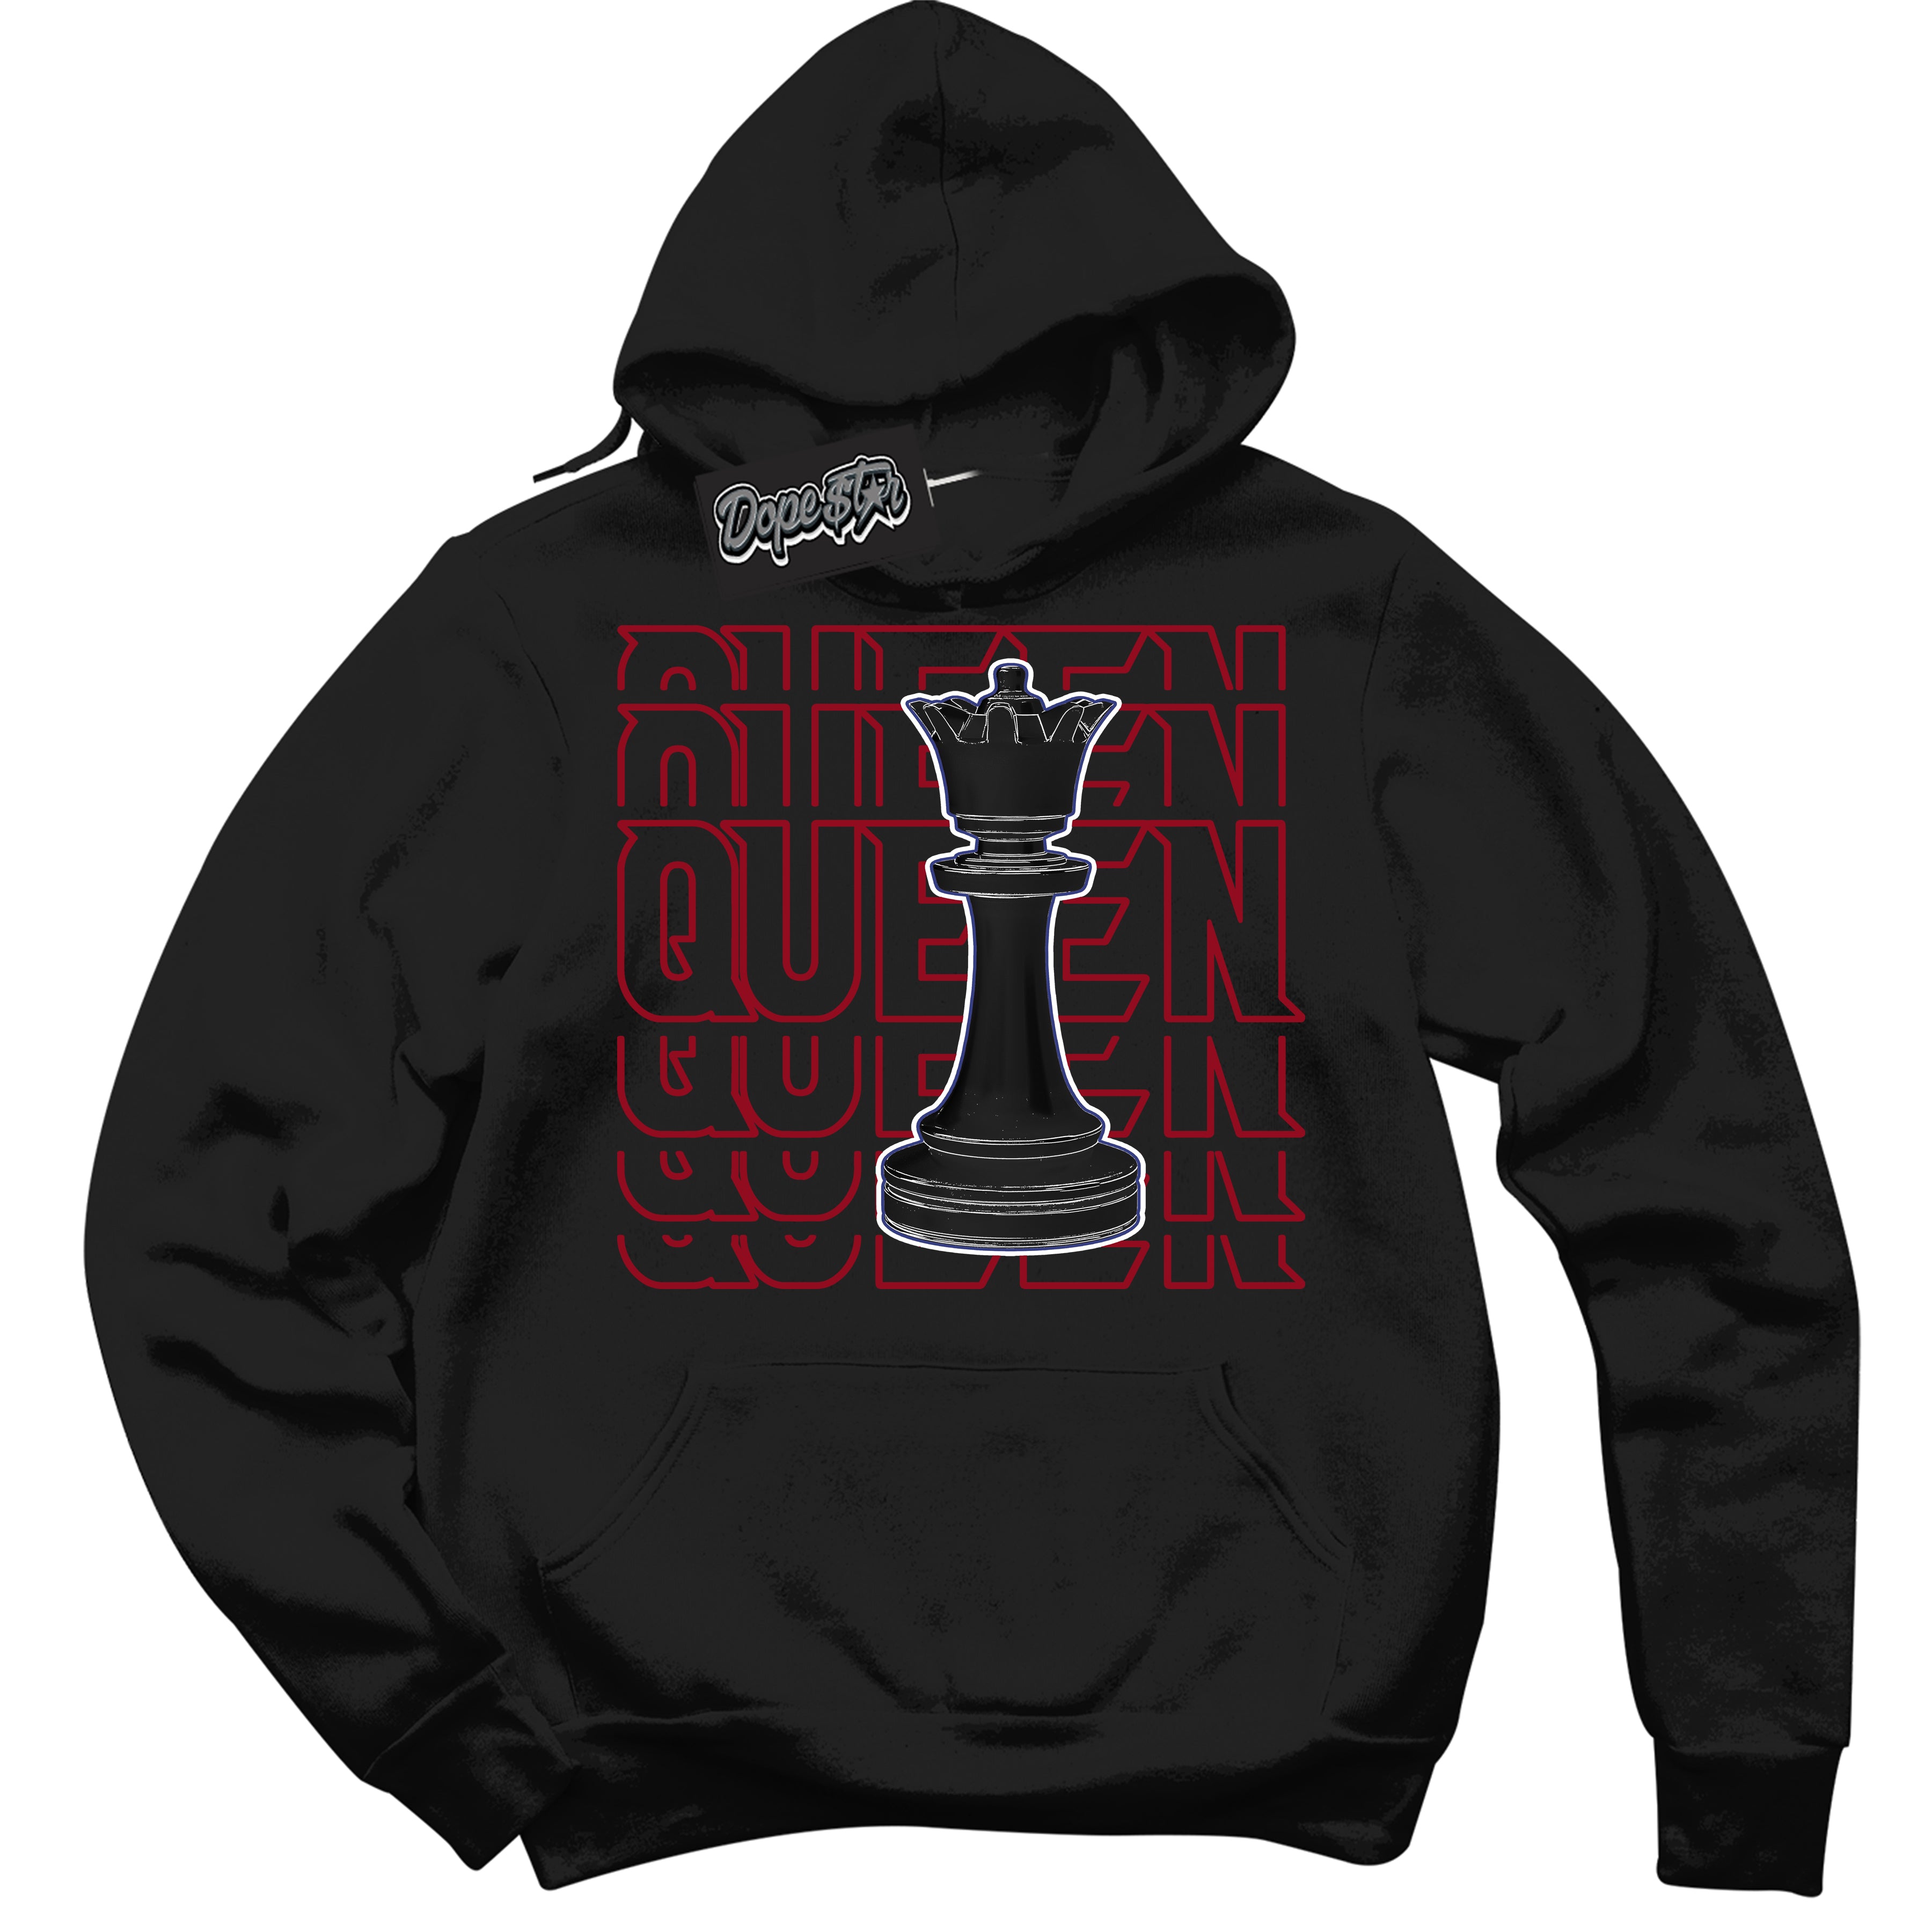 Cool Black Hoodie with “ Queen Chess ”  design that Perfectly Matches Playoffs 8s Sneakers.